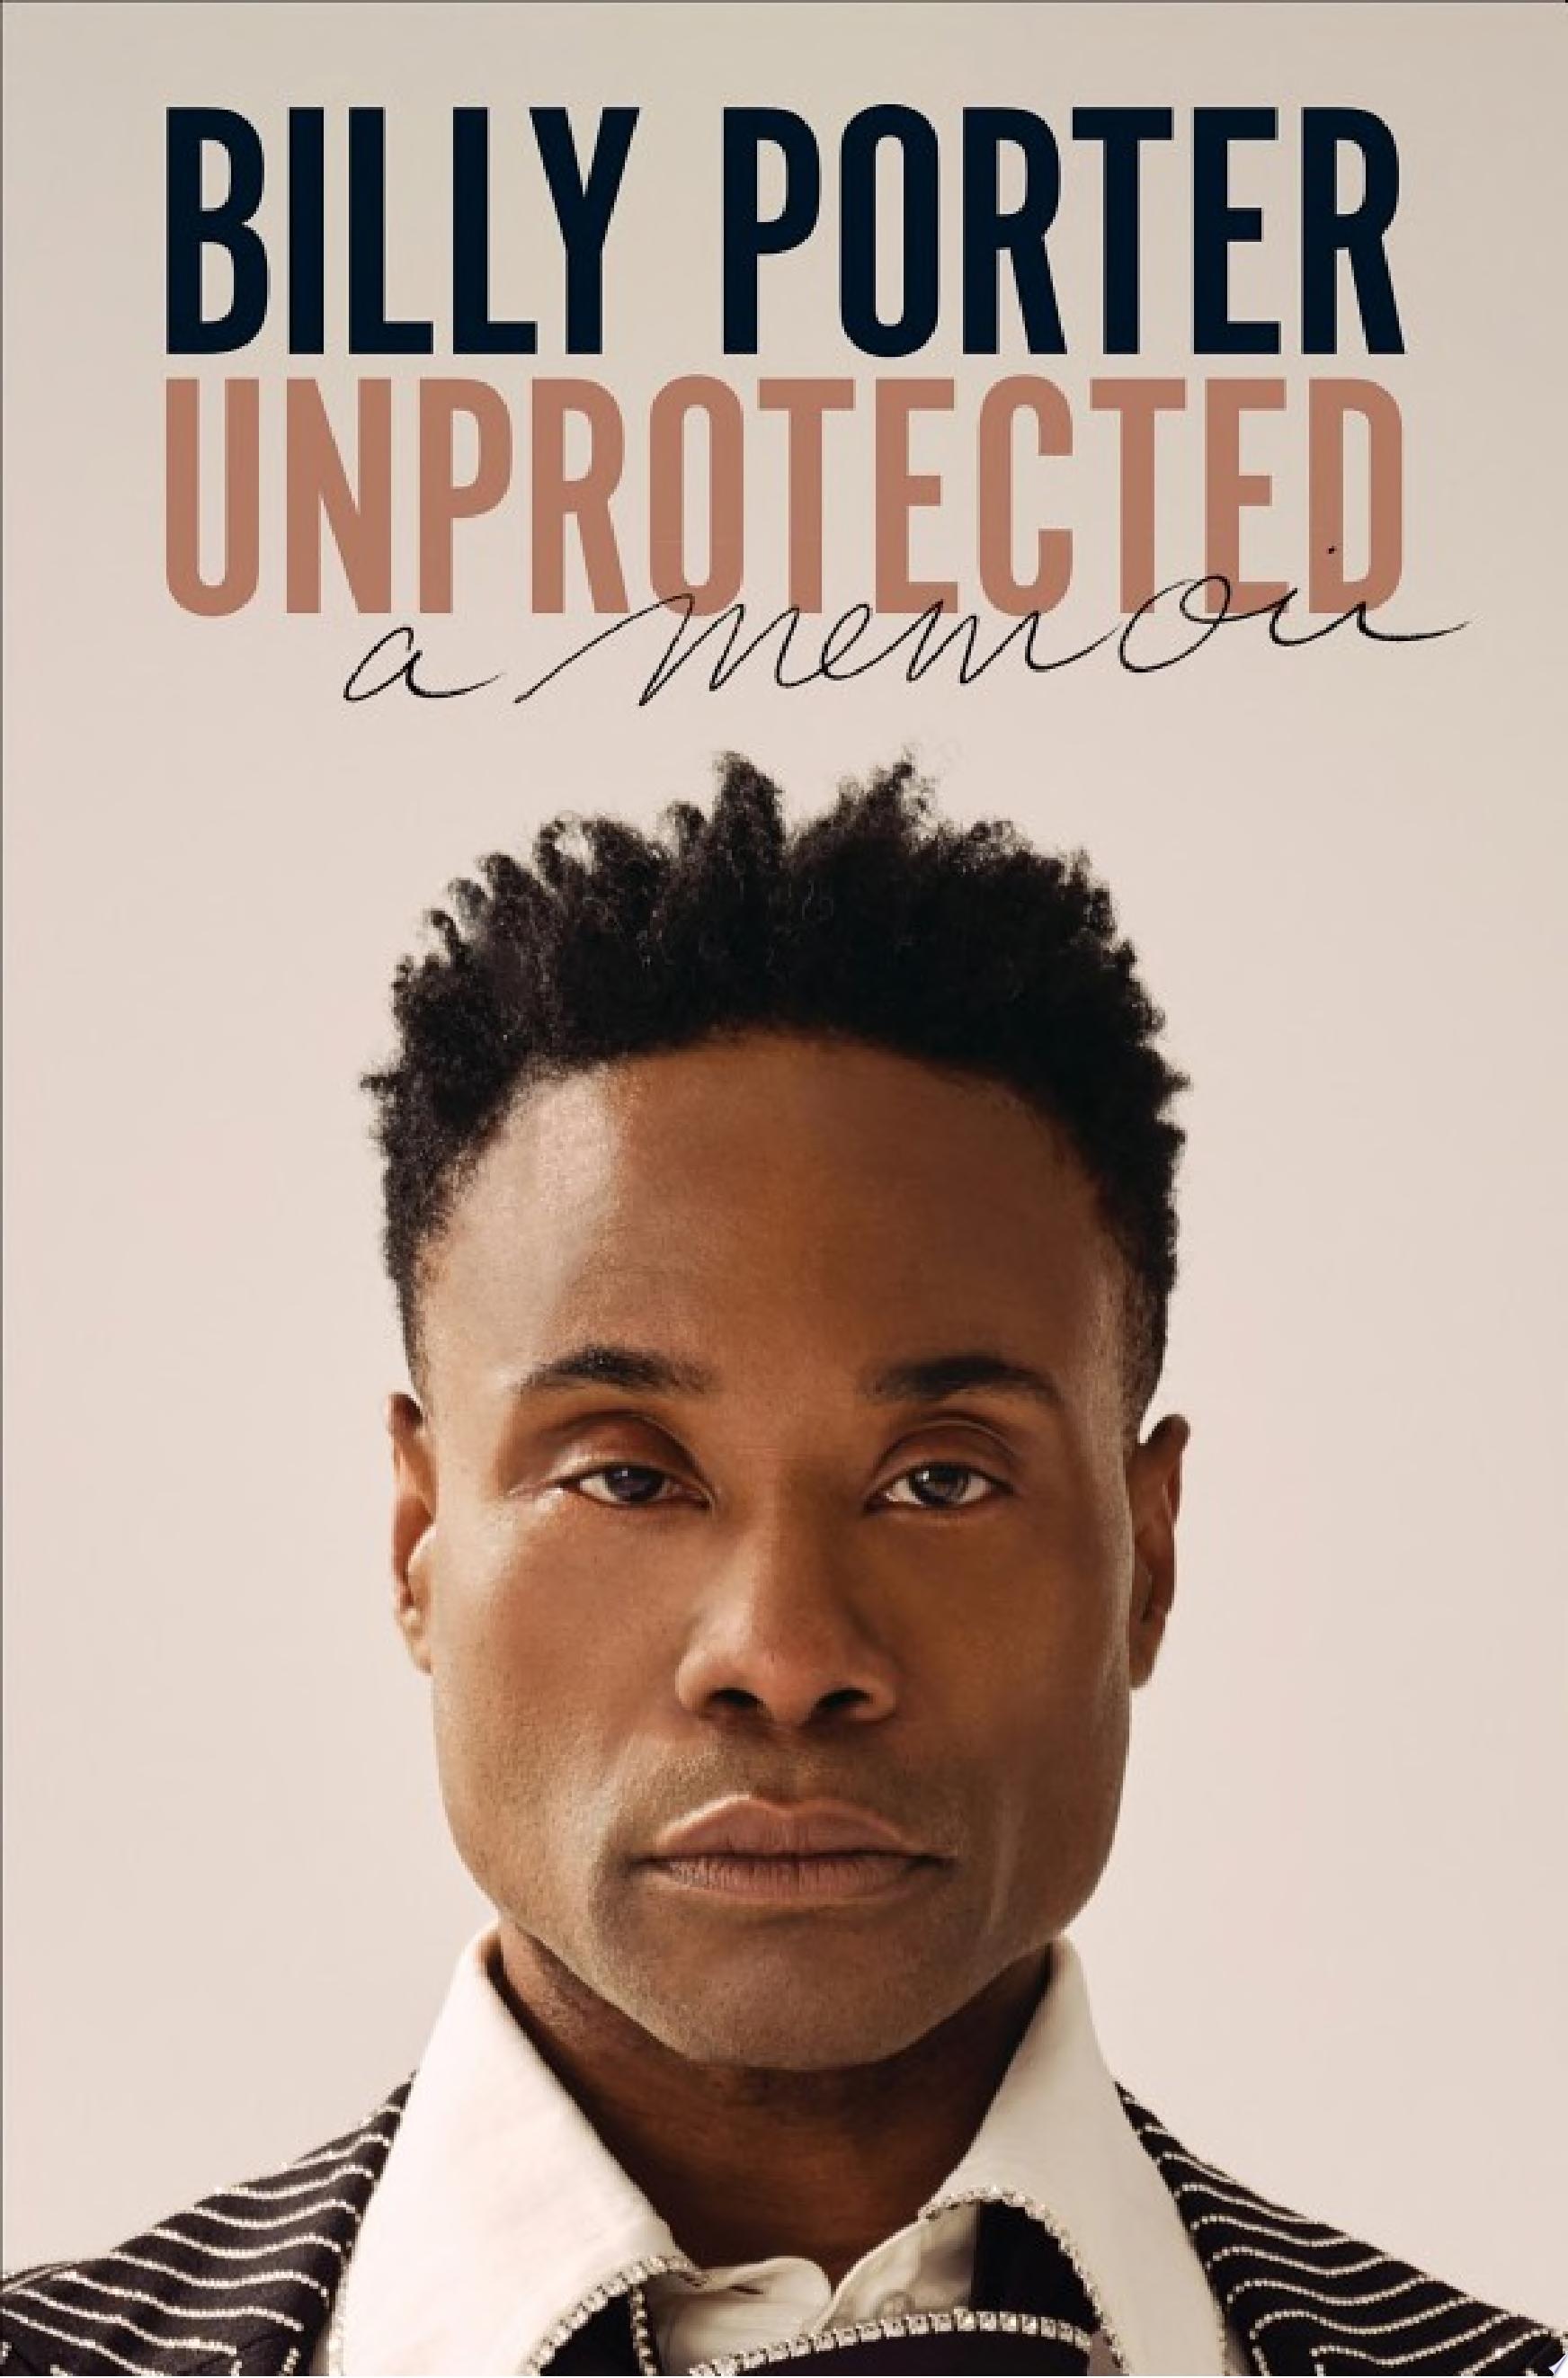 Image for "Unprotected"